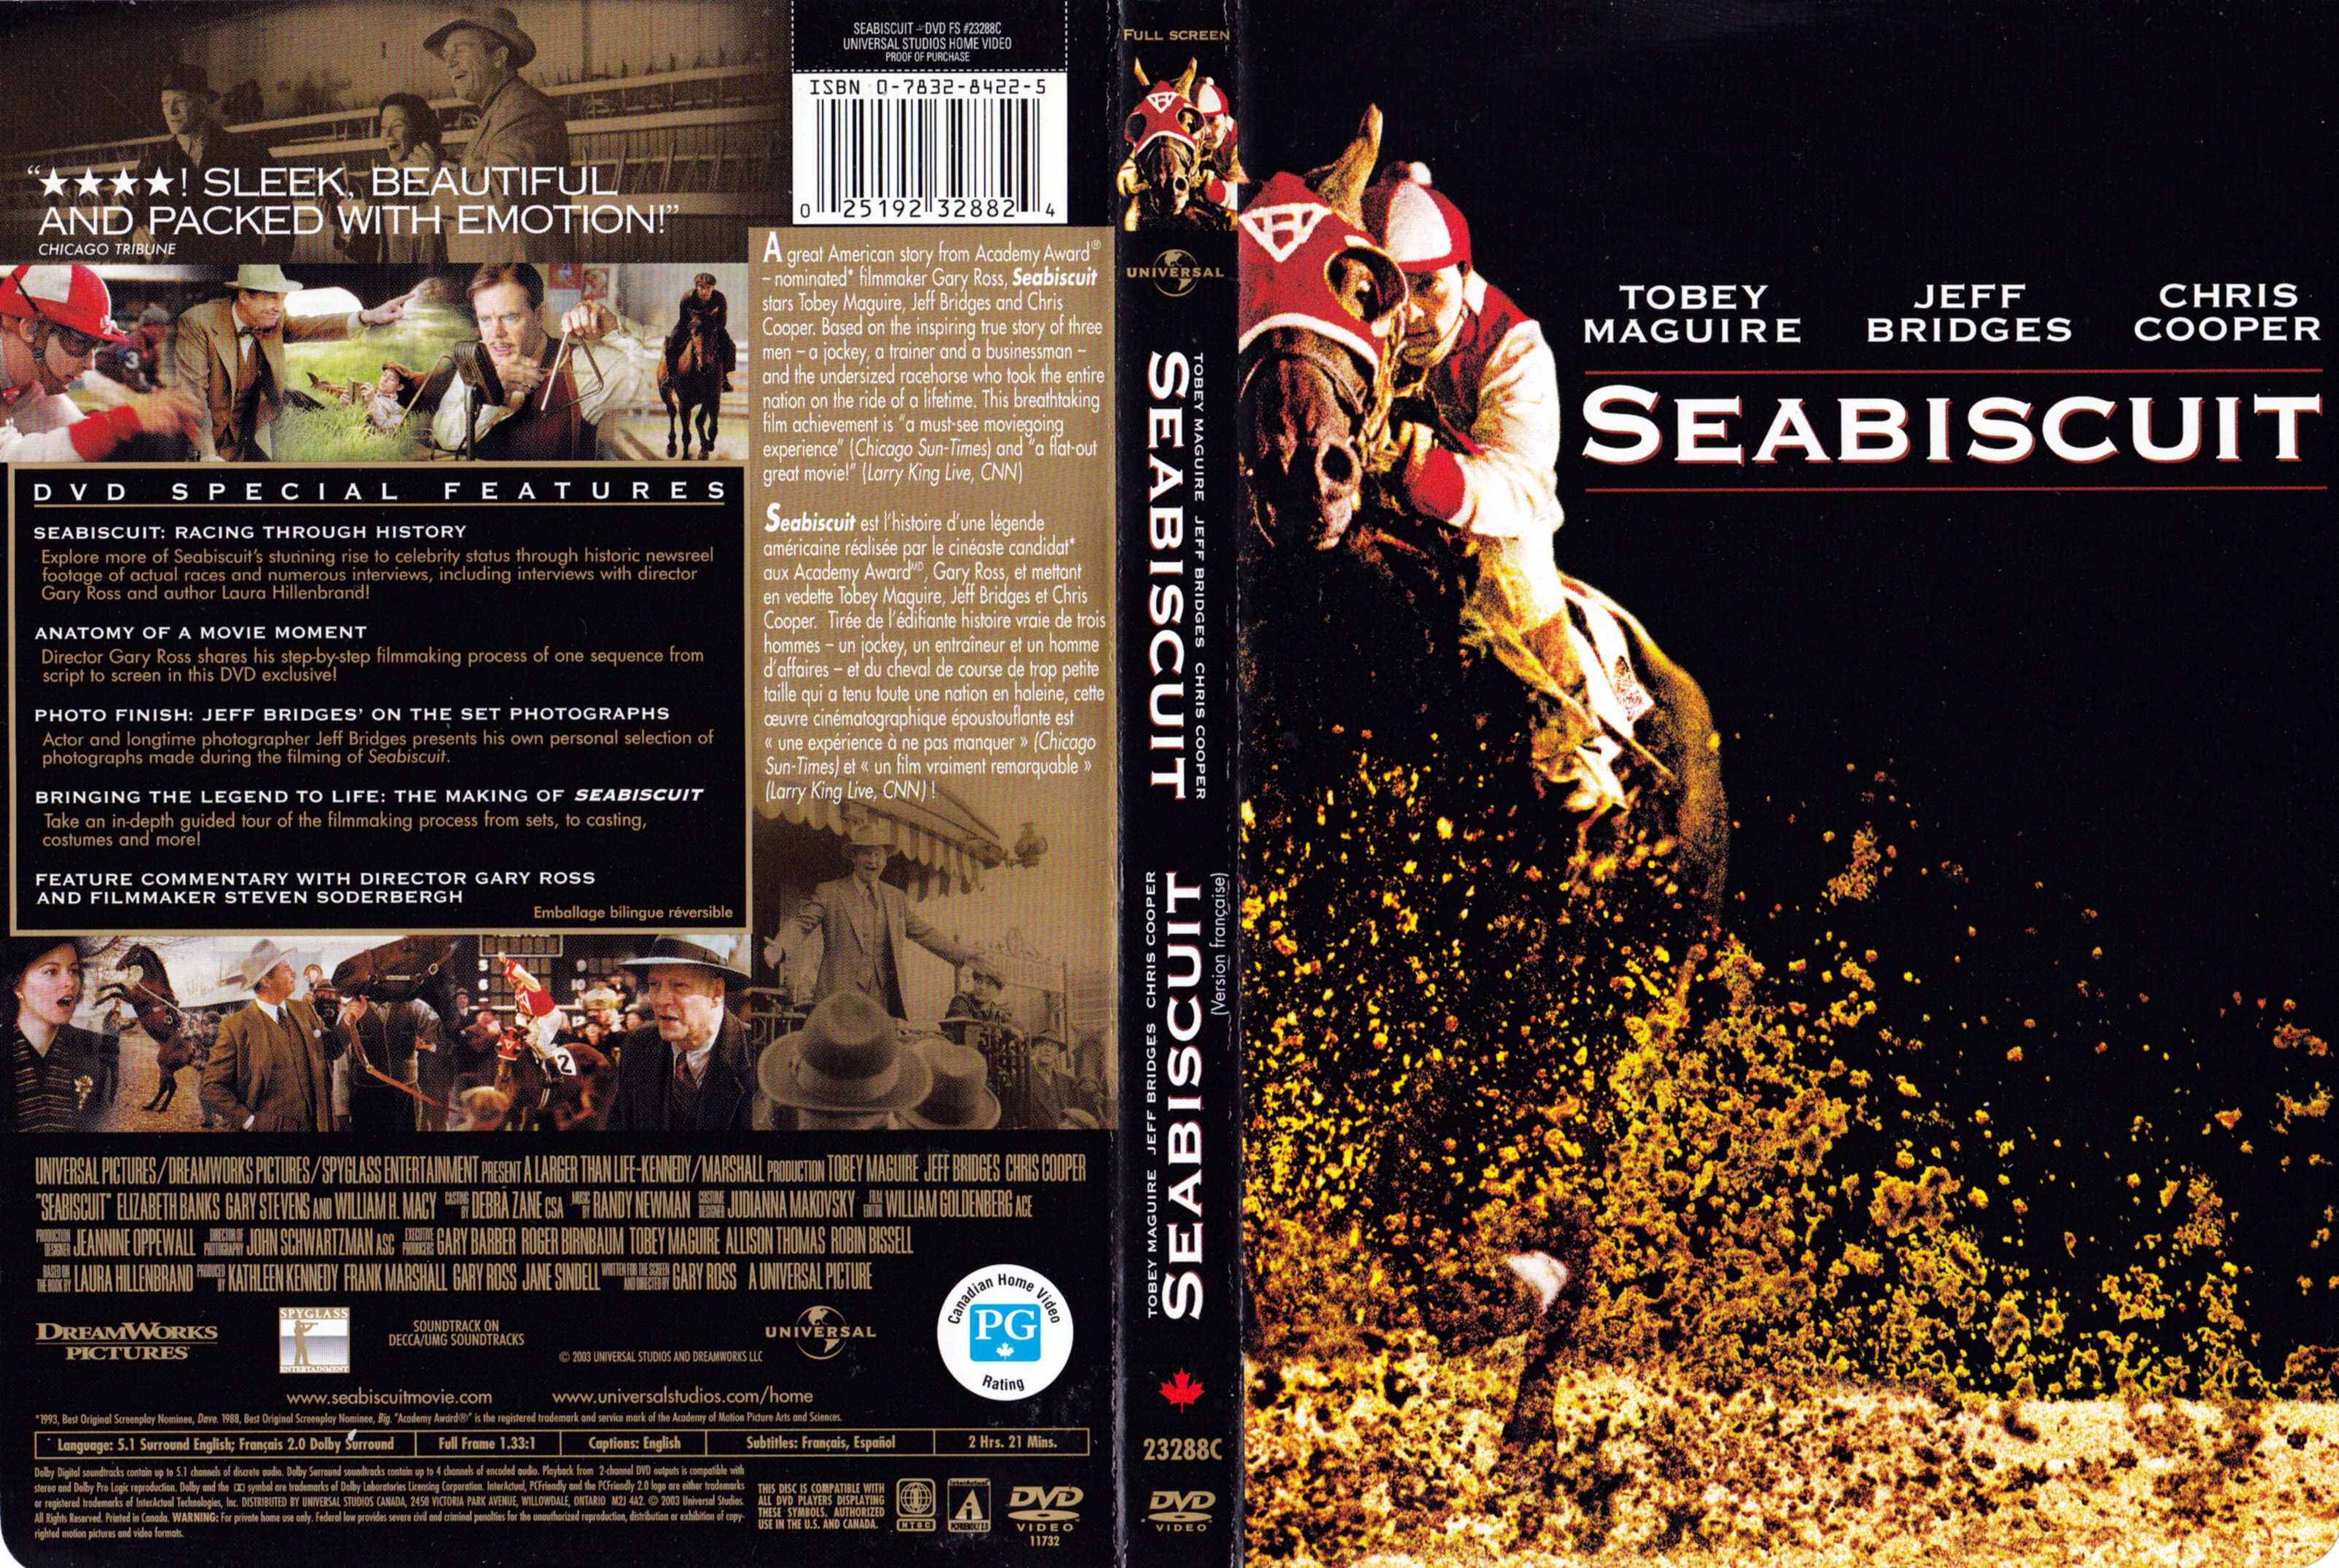 Jaquette DVD Seabiscuit (Canadienne)